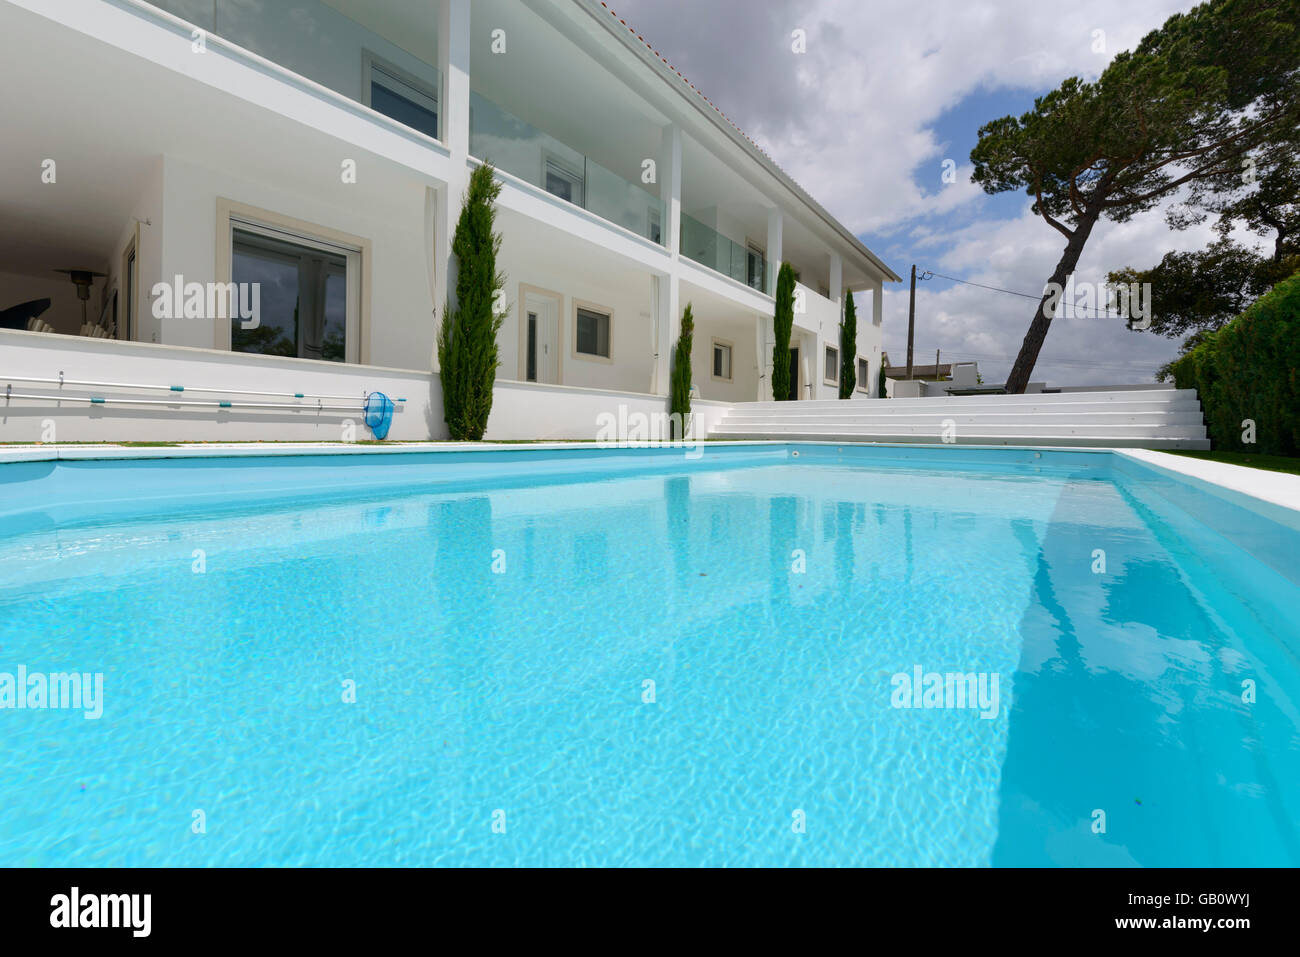 House with outdoor swimming pool Stock Photo